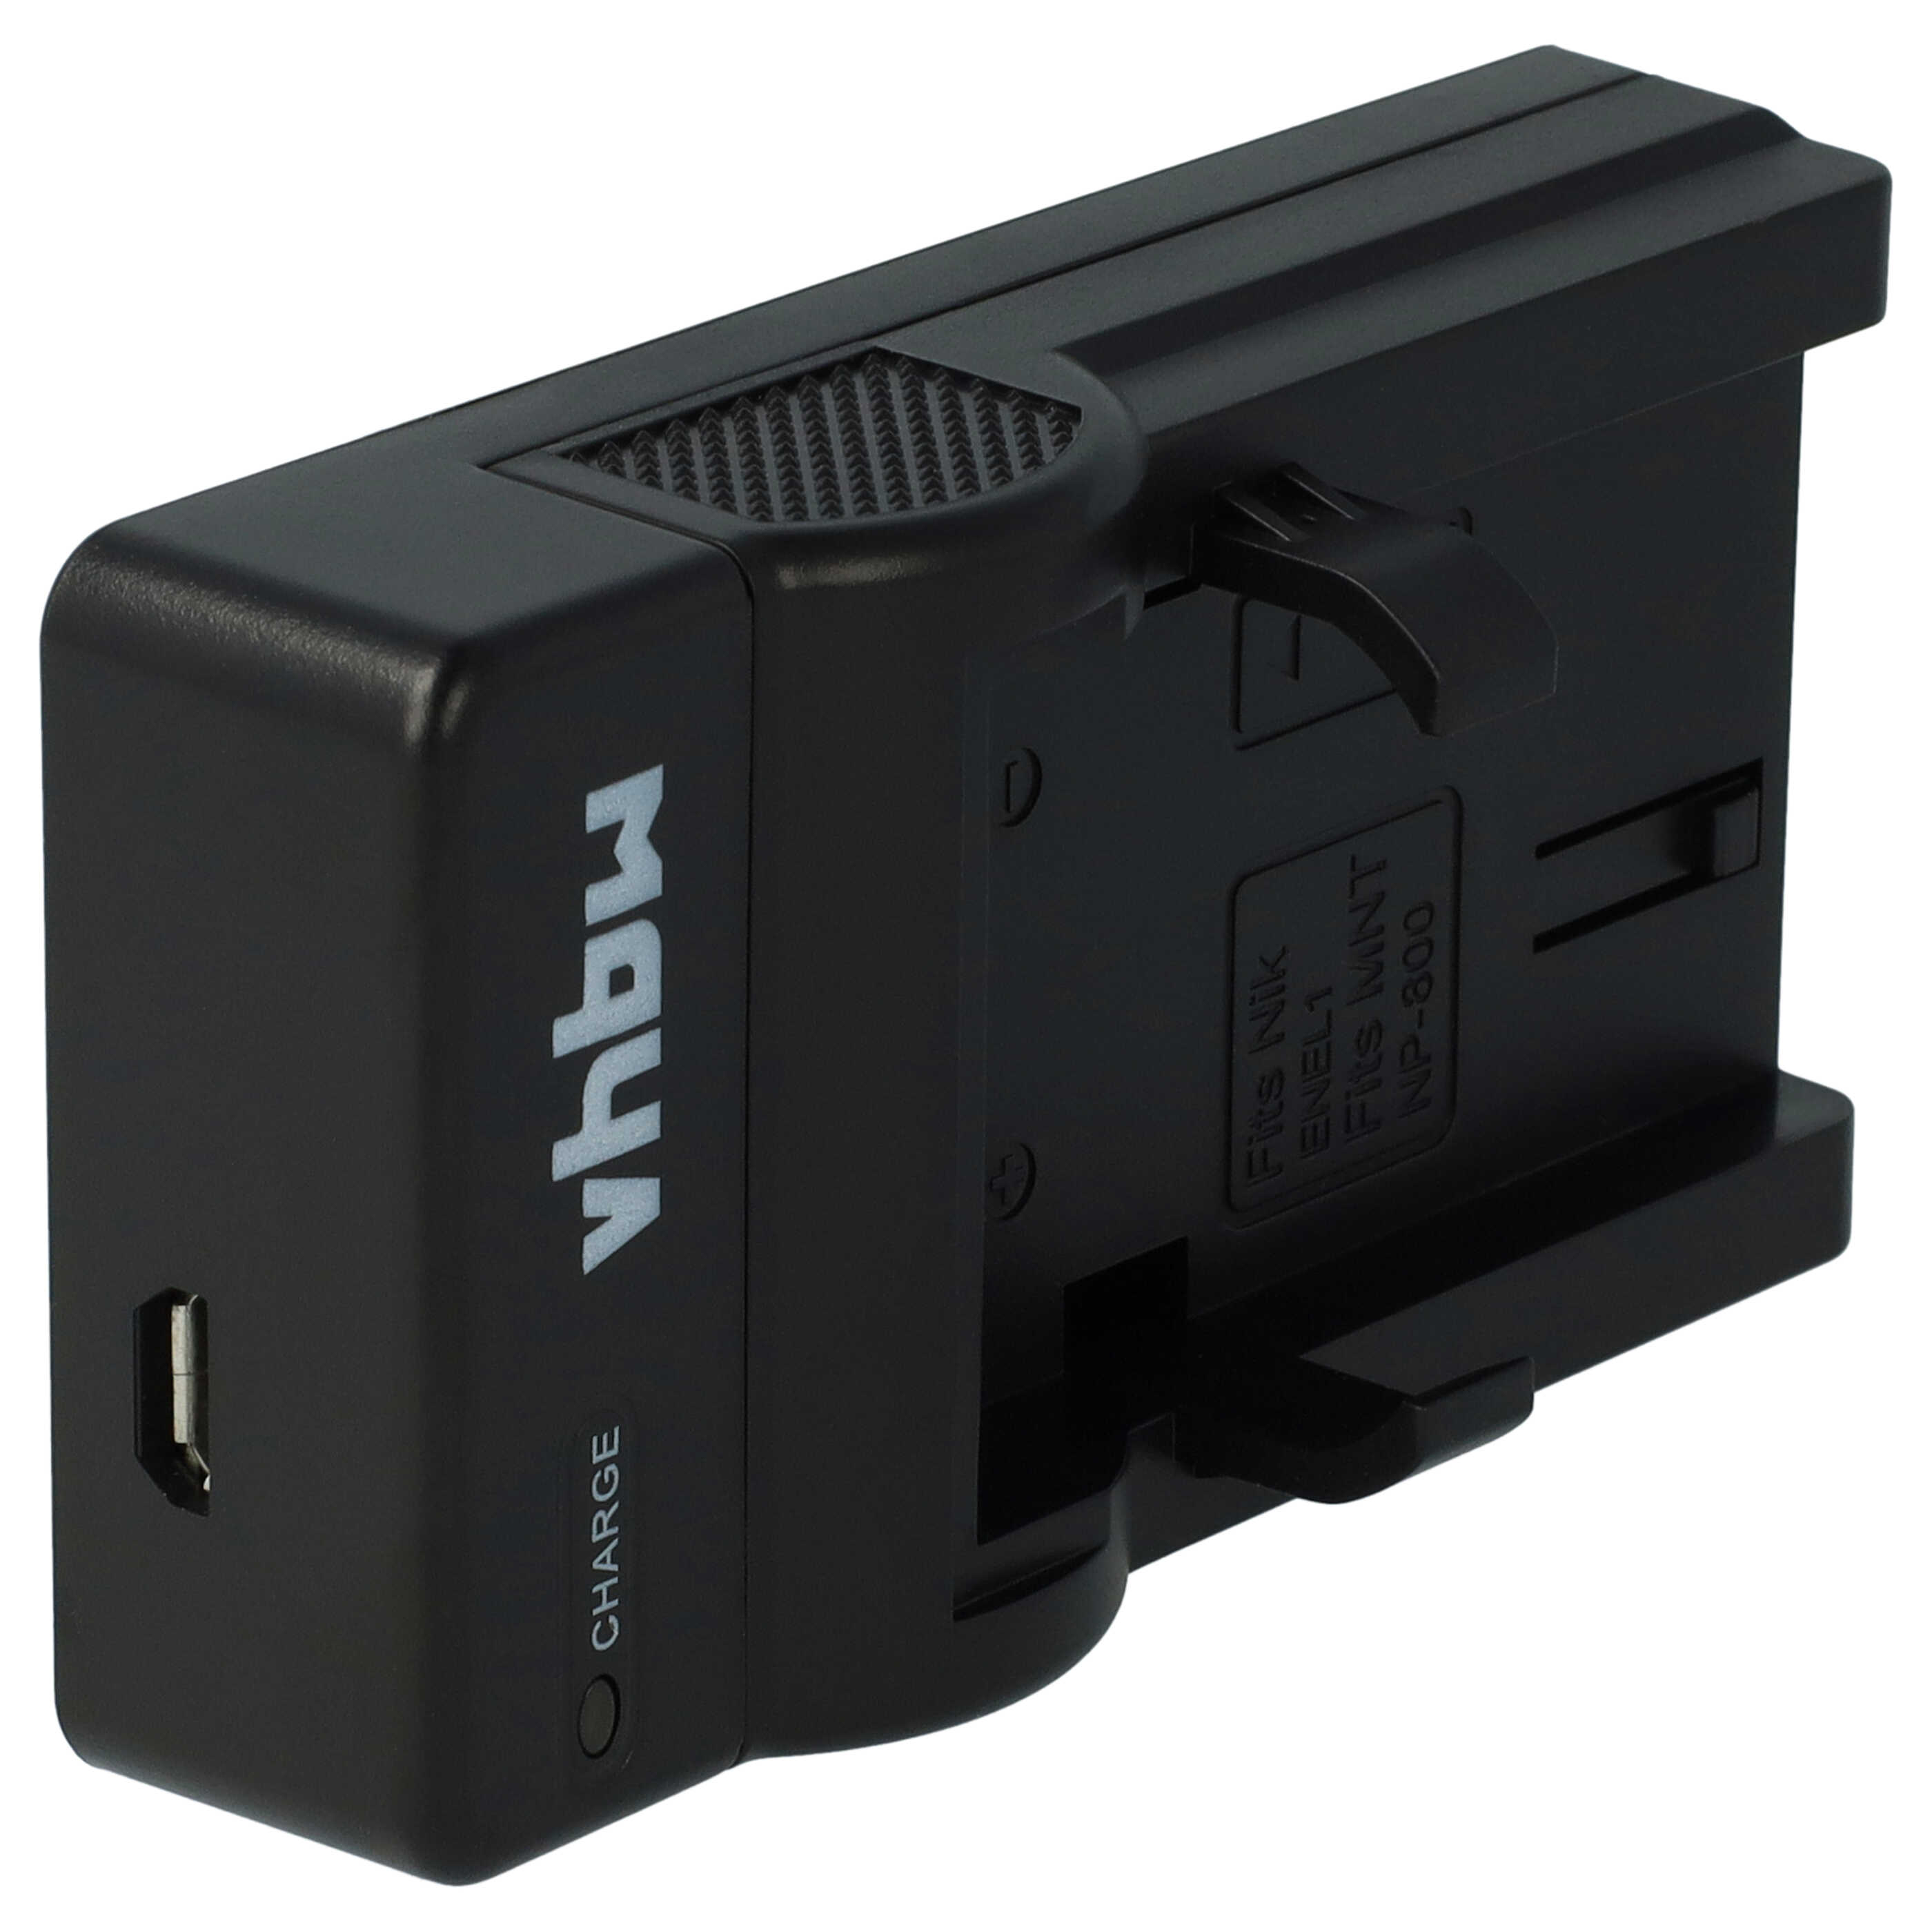 Battery Charger suitable for Minolta NP-800 Camera etc. - 0.5 A, 8.4 V